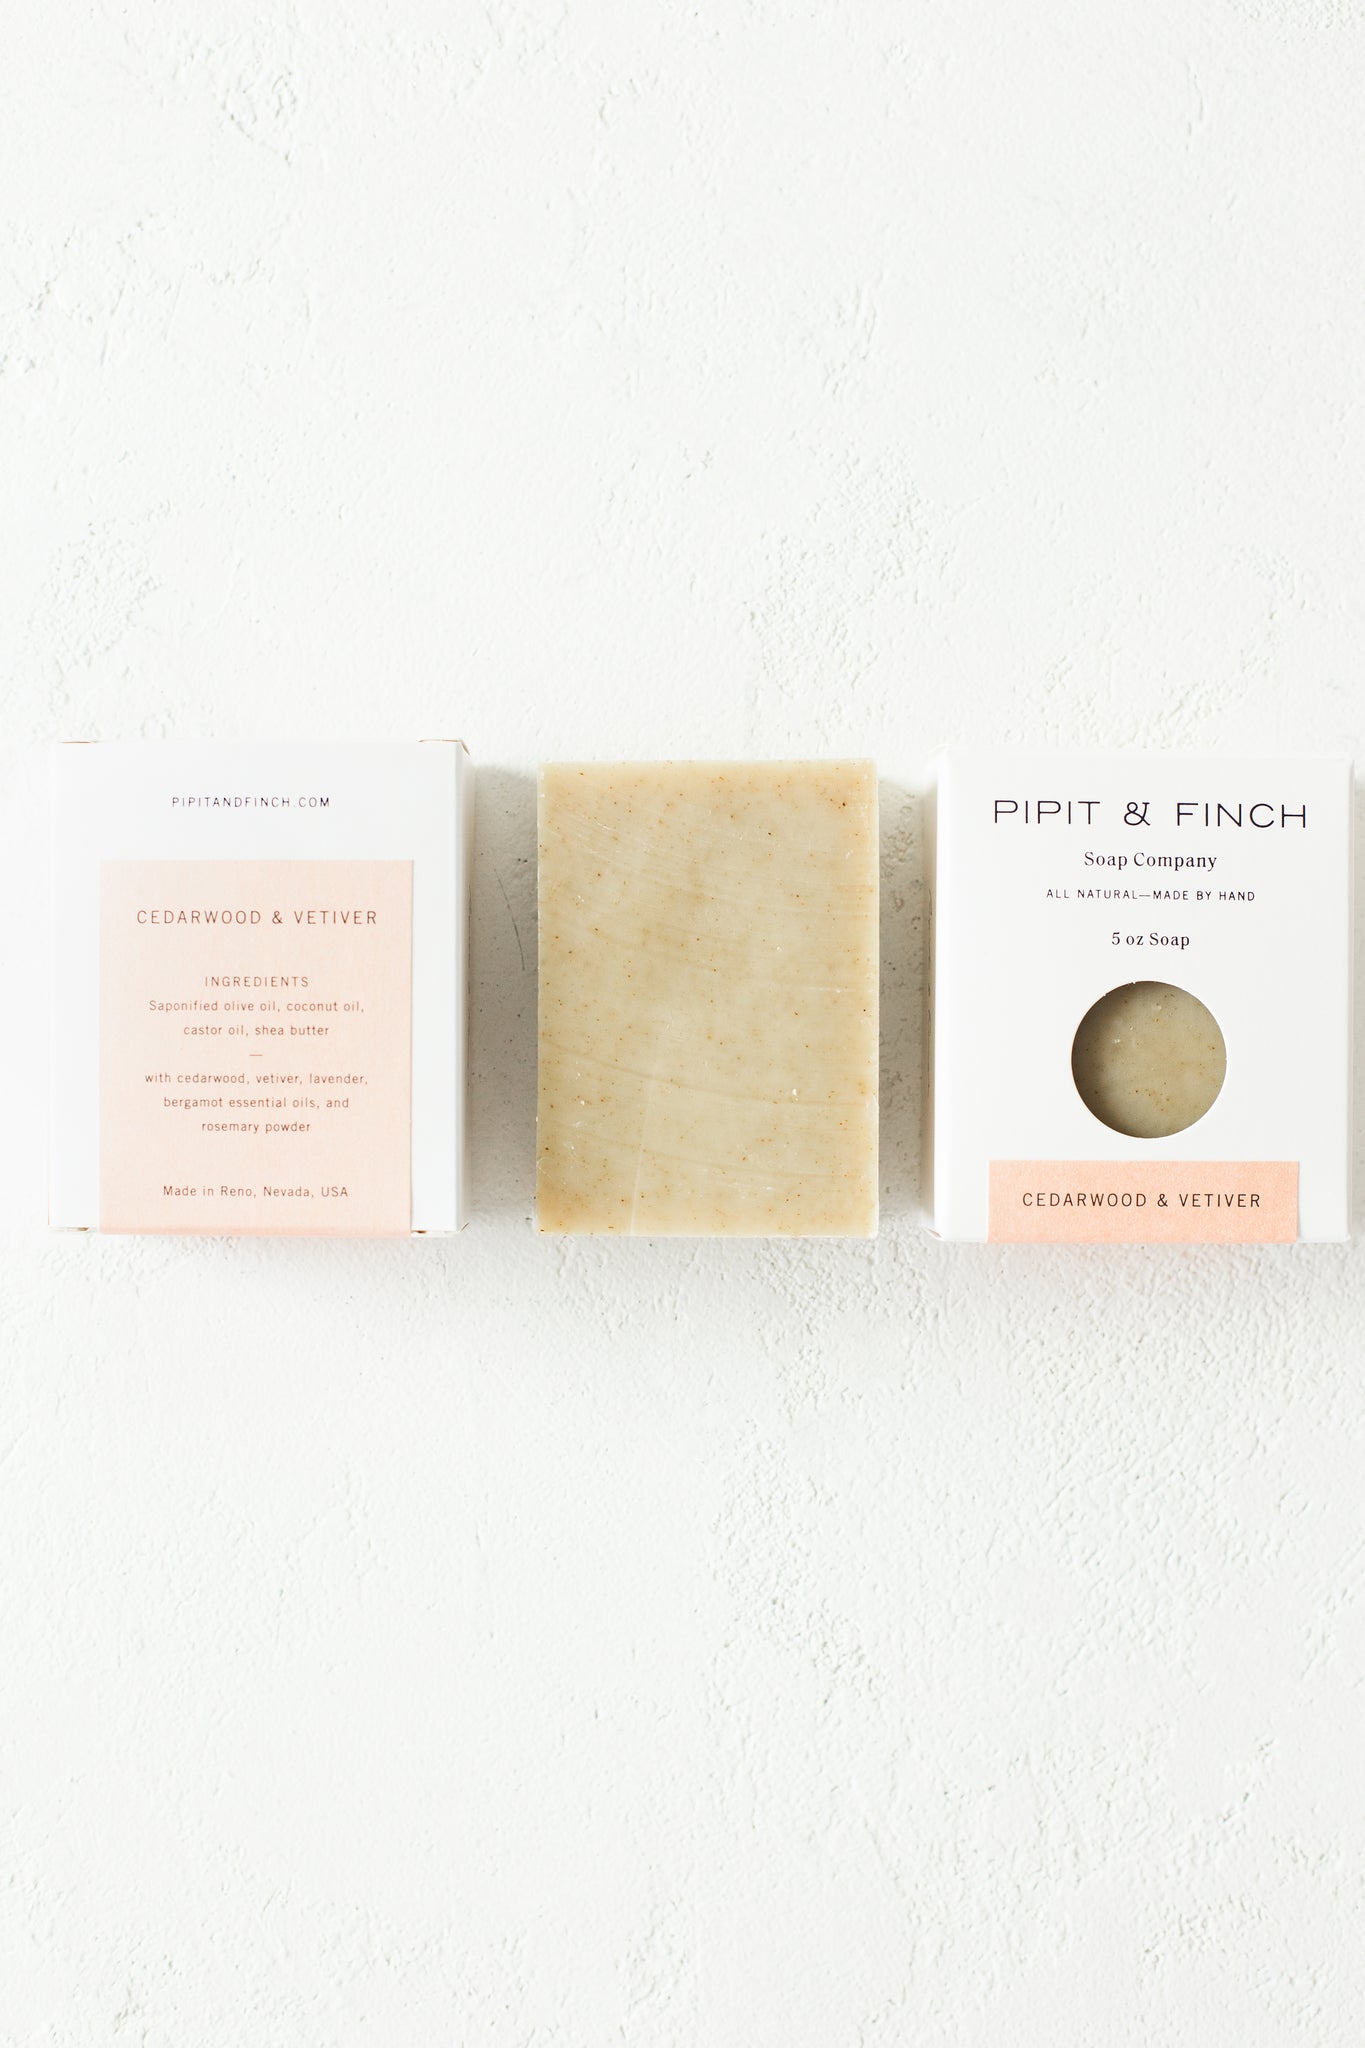 Cedarwood + Vetiver Olive Oil Soap with Rosemary Powder